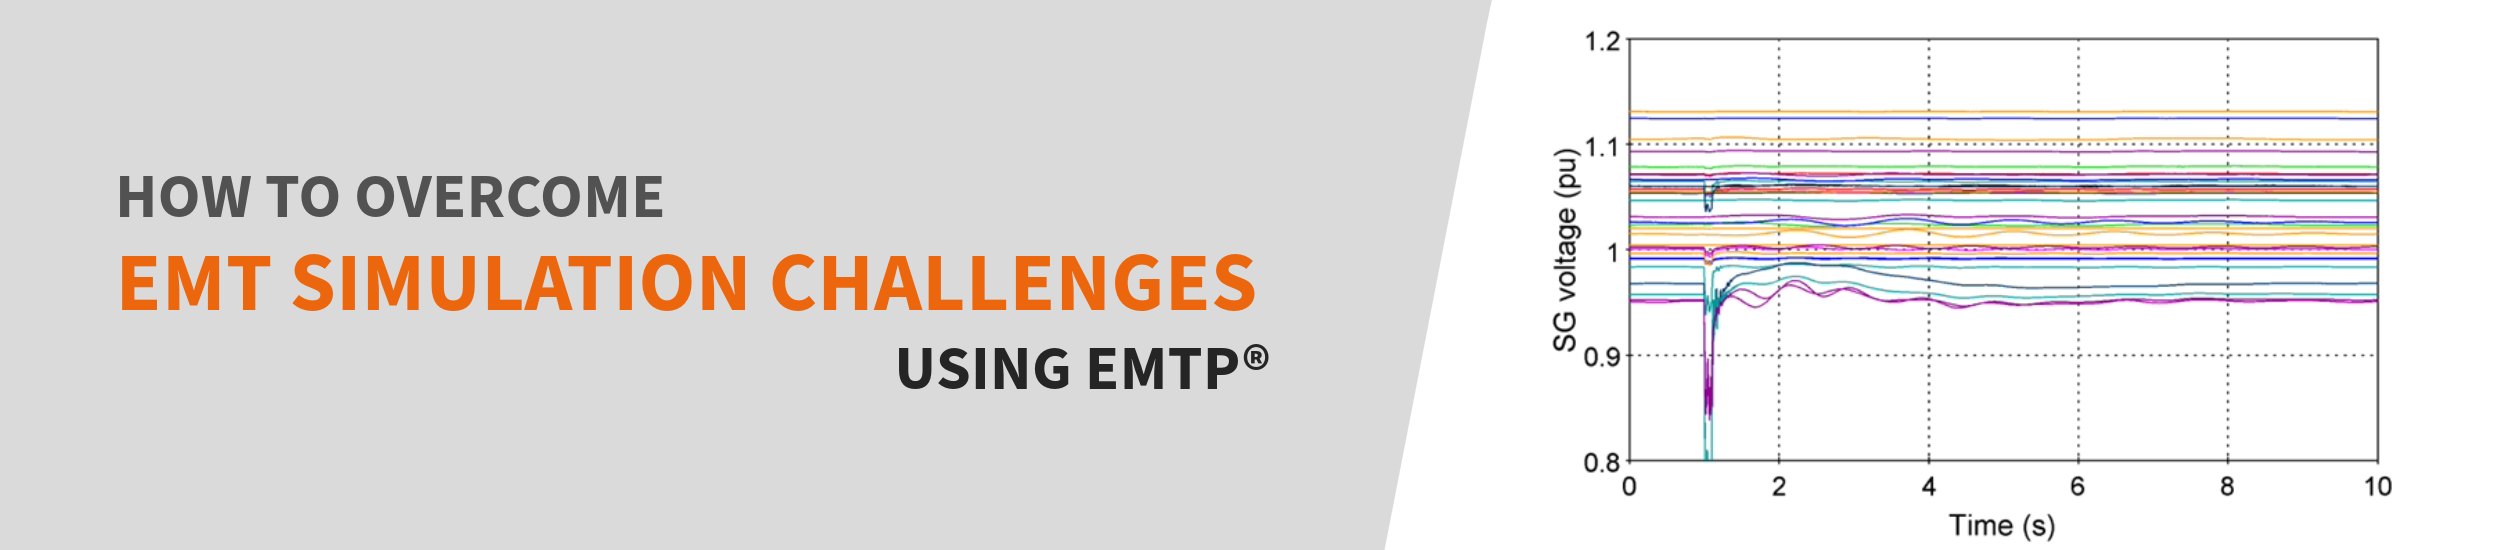 how to overcome emt simulation challenges using emtp - power simulation software